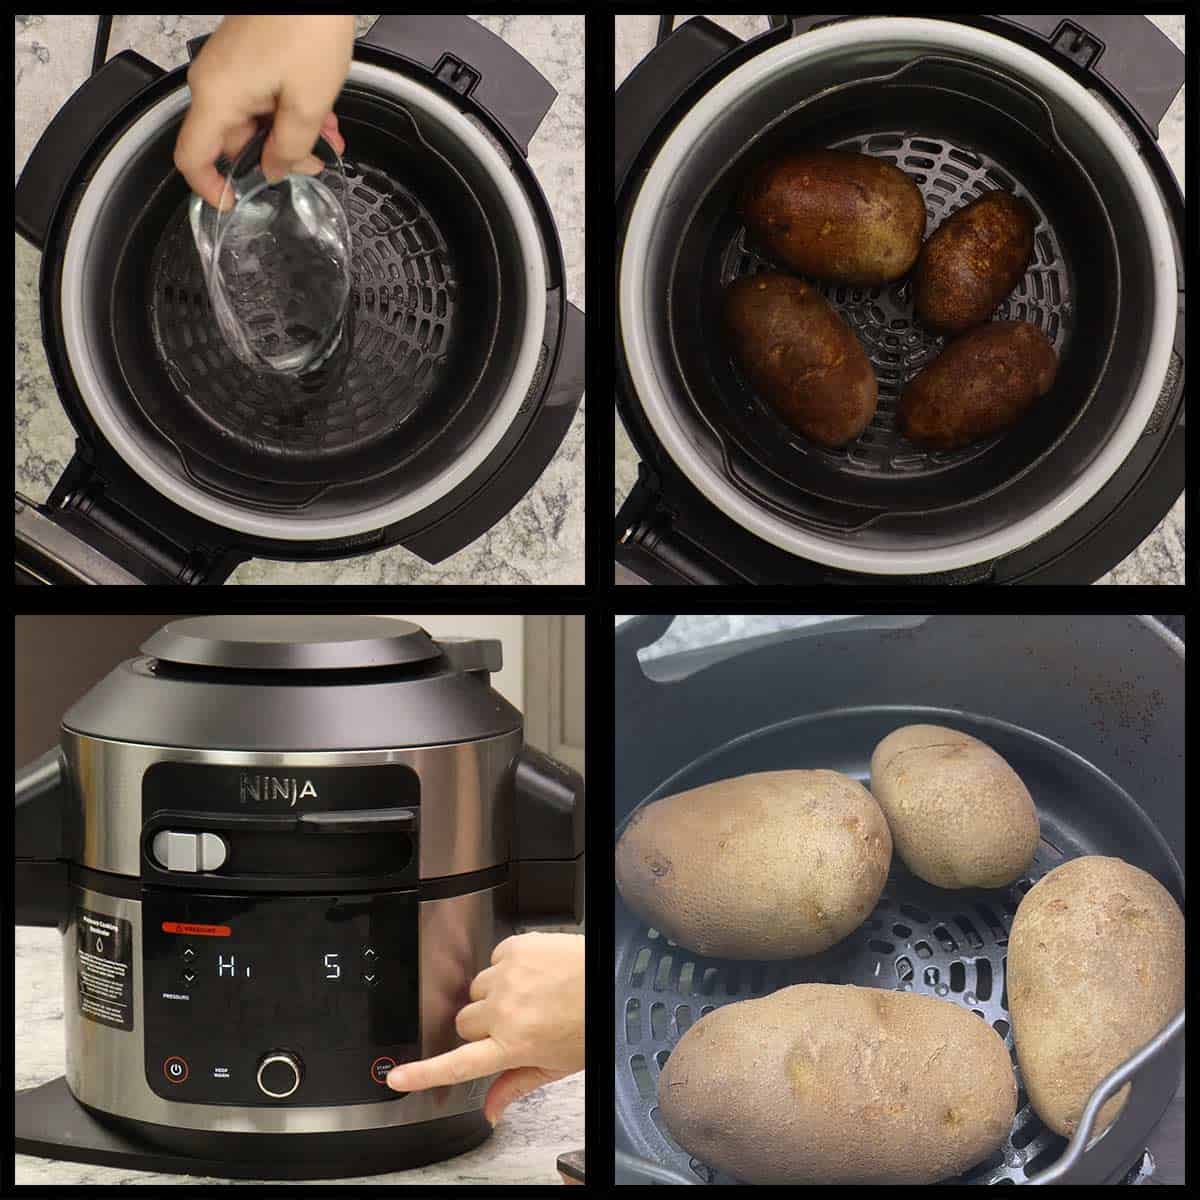 par-cooking the whole potatoes in the Ninja Foodi pressure cooker.